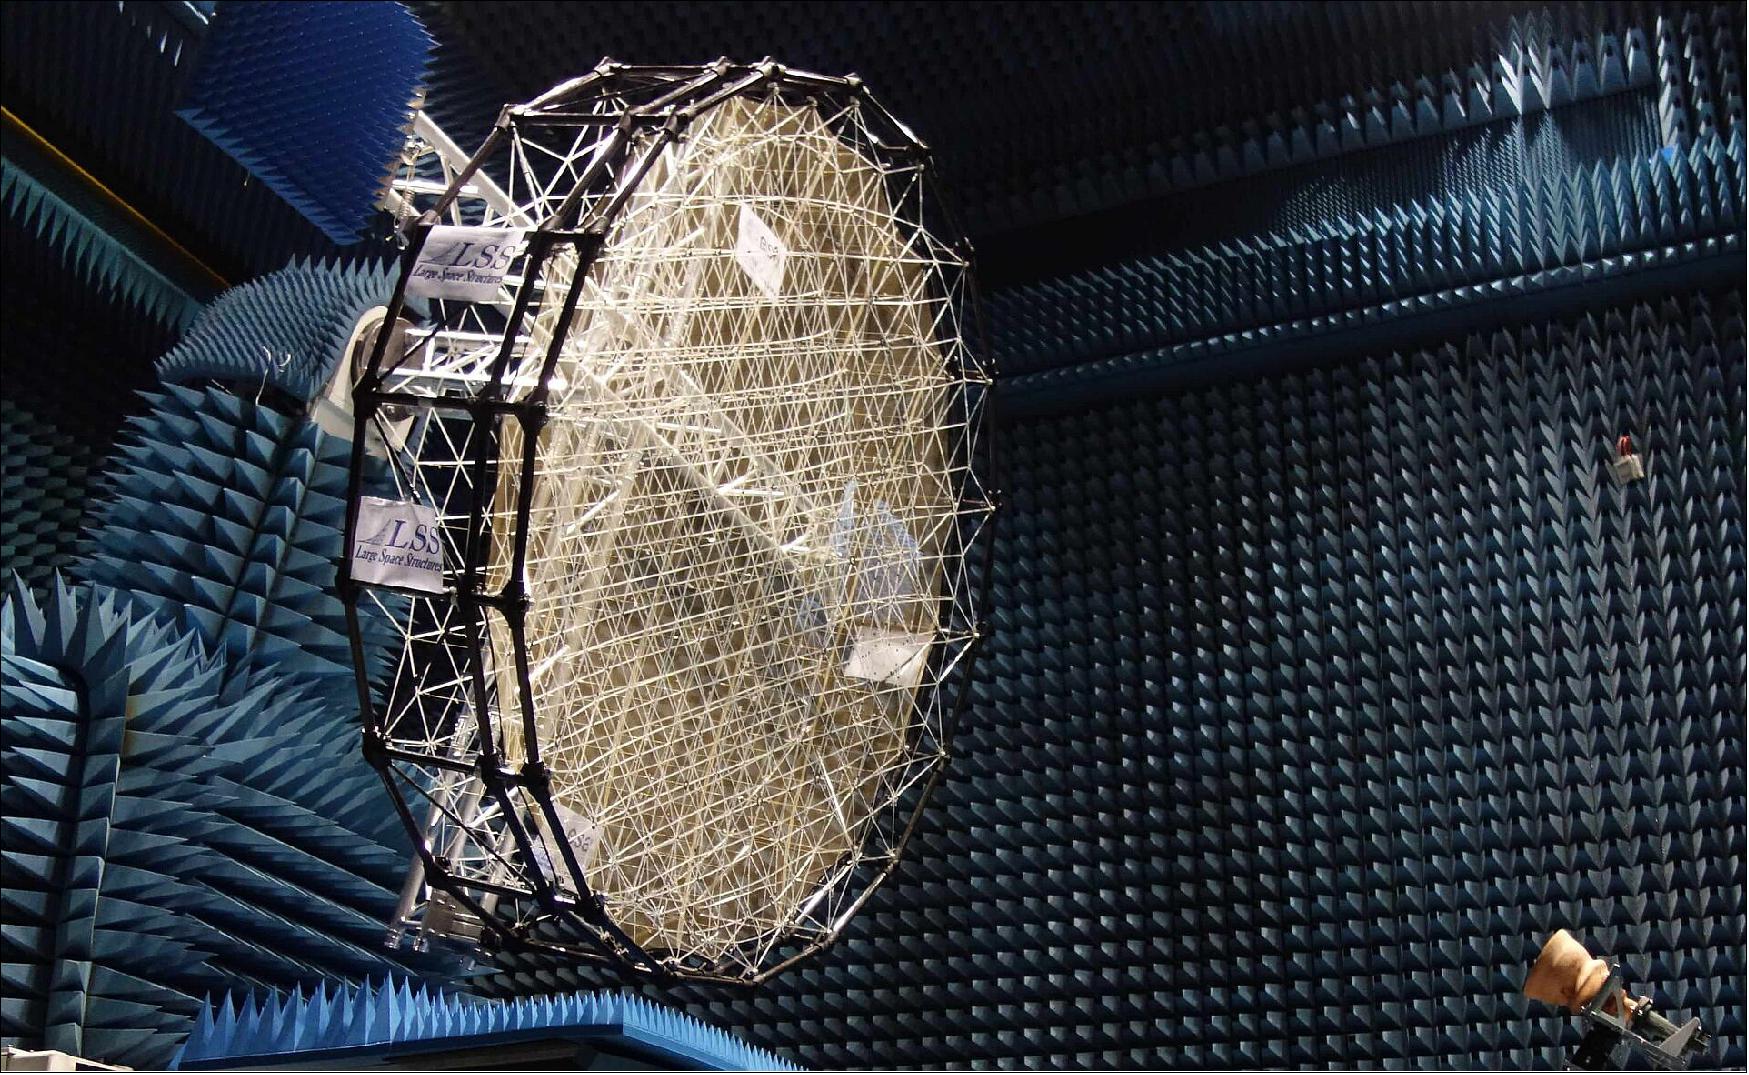 Figure 25: This prototype 2.6 m diameter metal-mesh antenna reflector represents a big step forward for the European space sector: versions can be manufactured to reproduce any surface pattern that antenna designers wish, something that was previously possible only with traditional solid antennas (image credit: Leri Datashvili/Large Space Structures GmbH)